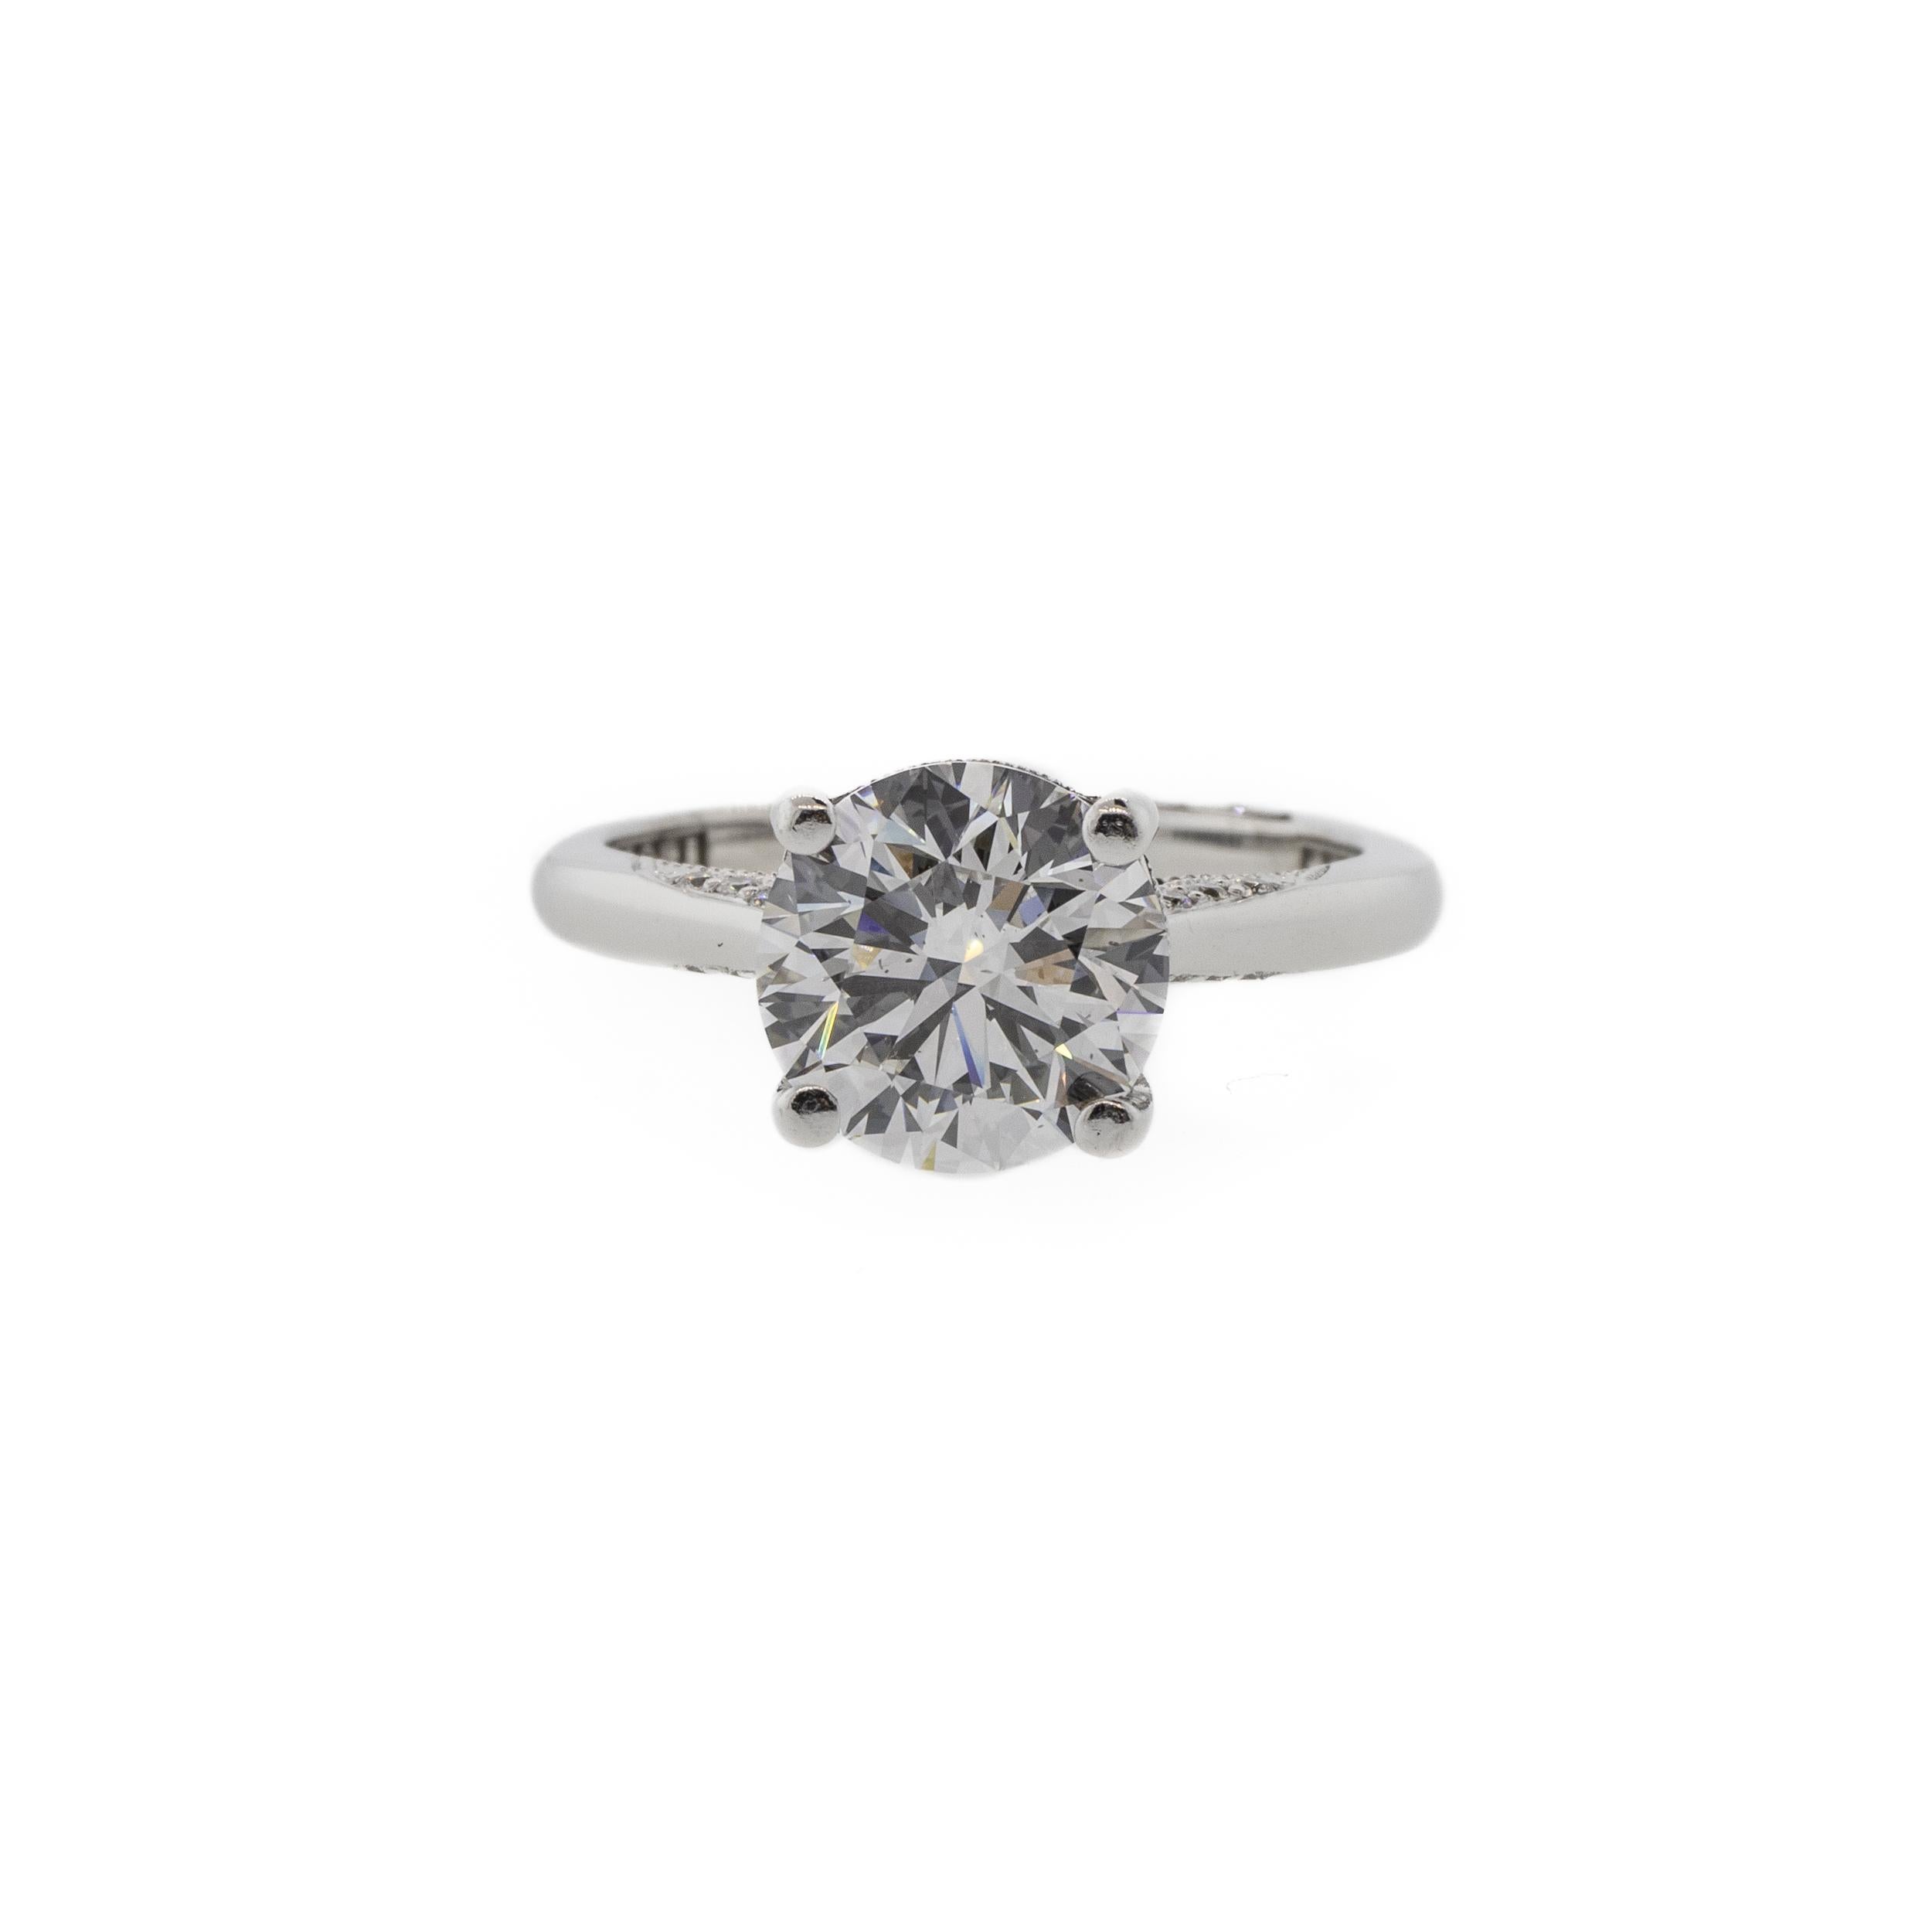 A perfectly classic Tacori solitaire engagement ring in an elegant four prong setting. Featuring a GIA certified 2.02ct D/VS2 round brilliant cut diamond. The 18K white gold band has lovely milgrain details along the top and bottom of the shoulders.